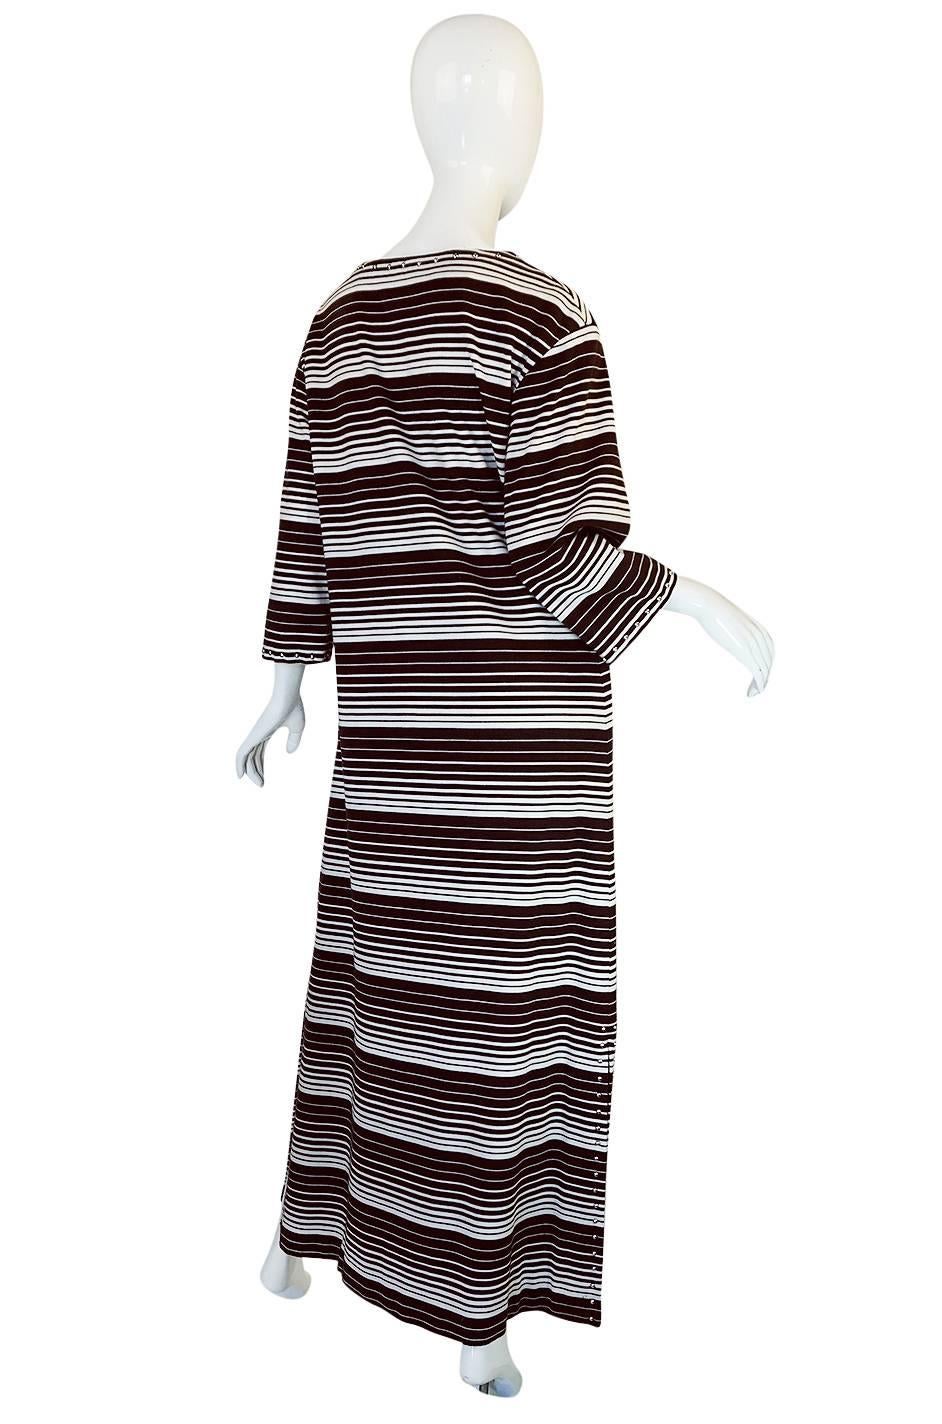 The graphic feel that the bold brown and white striping give this dress is amazing and the loose and easy cut make it incredibly comfortable to wear. It is constructed of a light, cotton-wool mix that has a soft, almost T-shirt feel to it. This